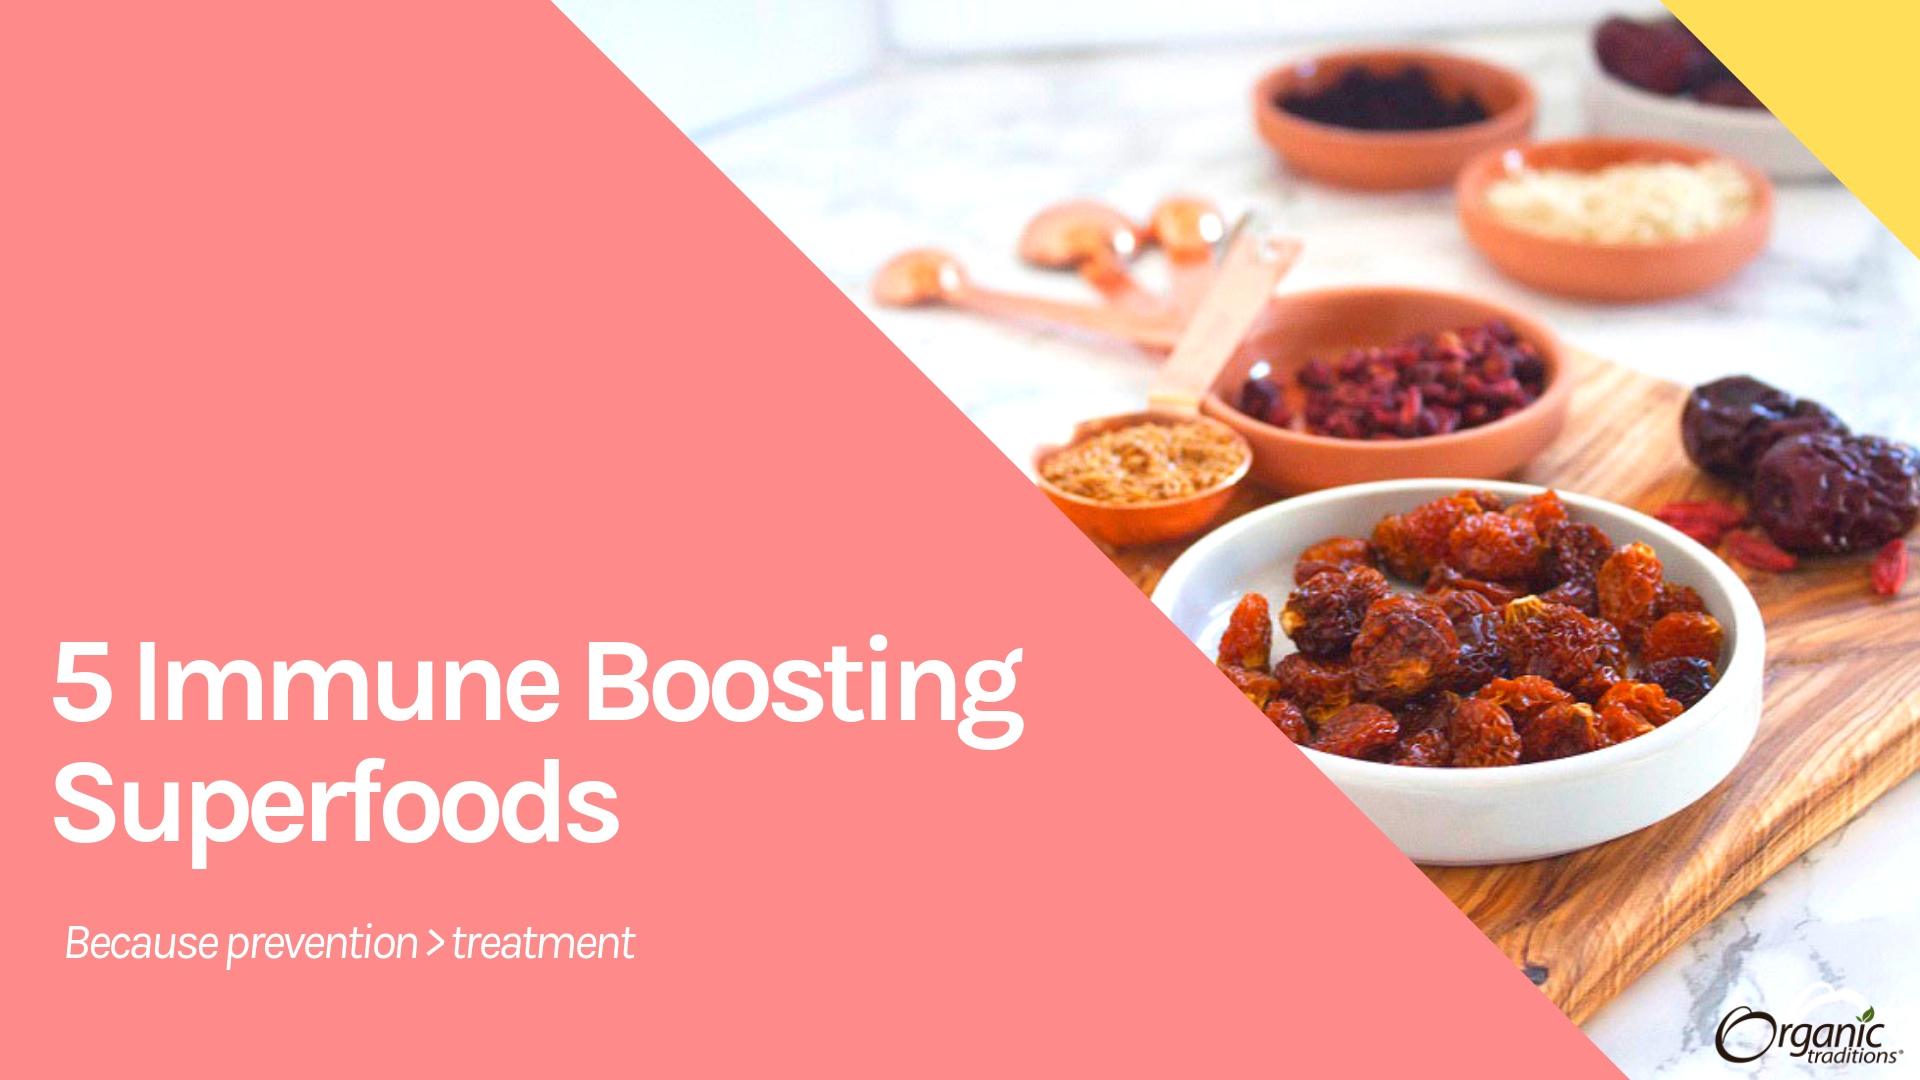 5 Immune Boosting Superfoods You Need This Season!